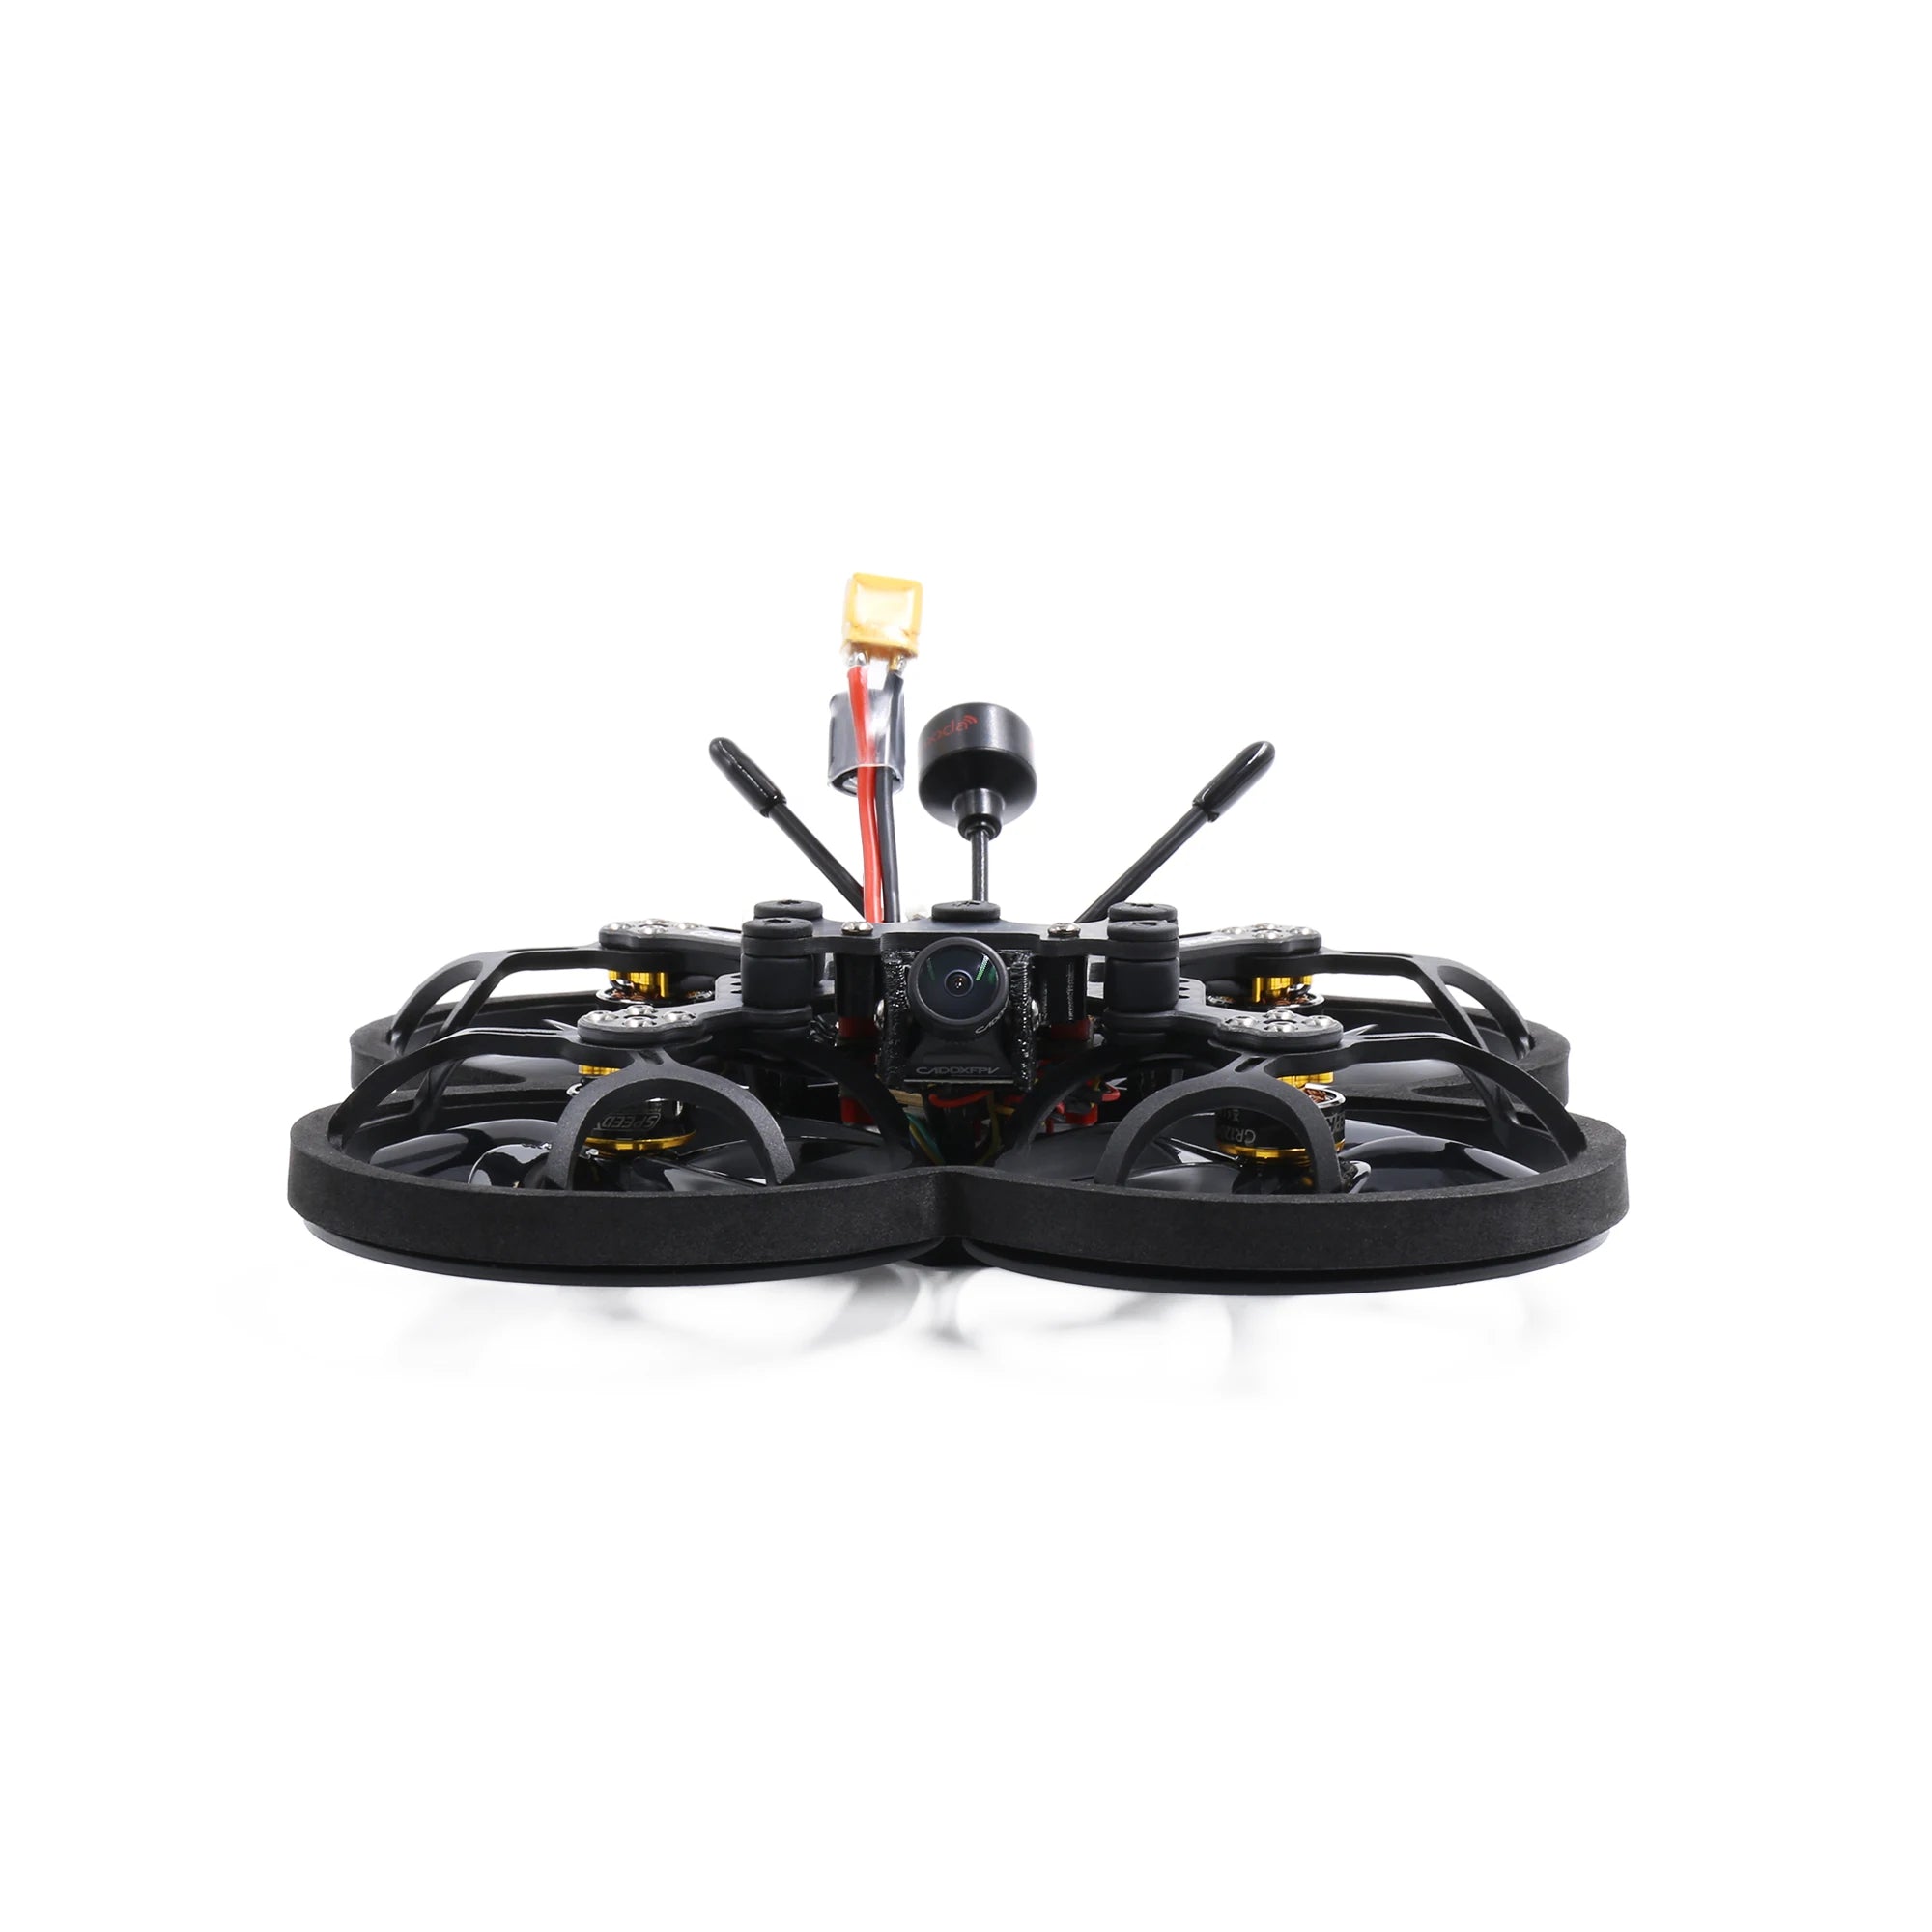 GEPRC CineLog25 Analog CineWhoop Drone, All innovations are disruptive for GEPRC CineLog25